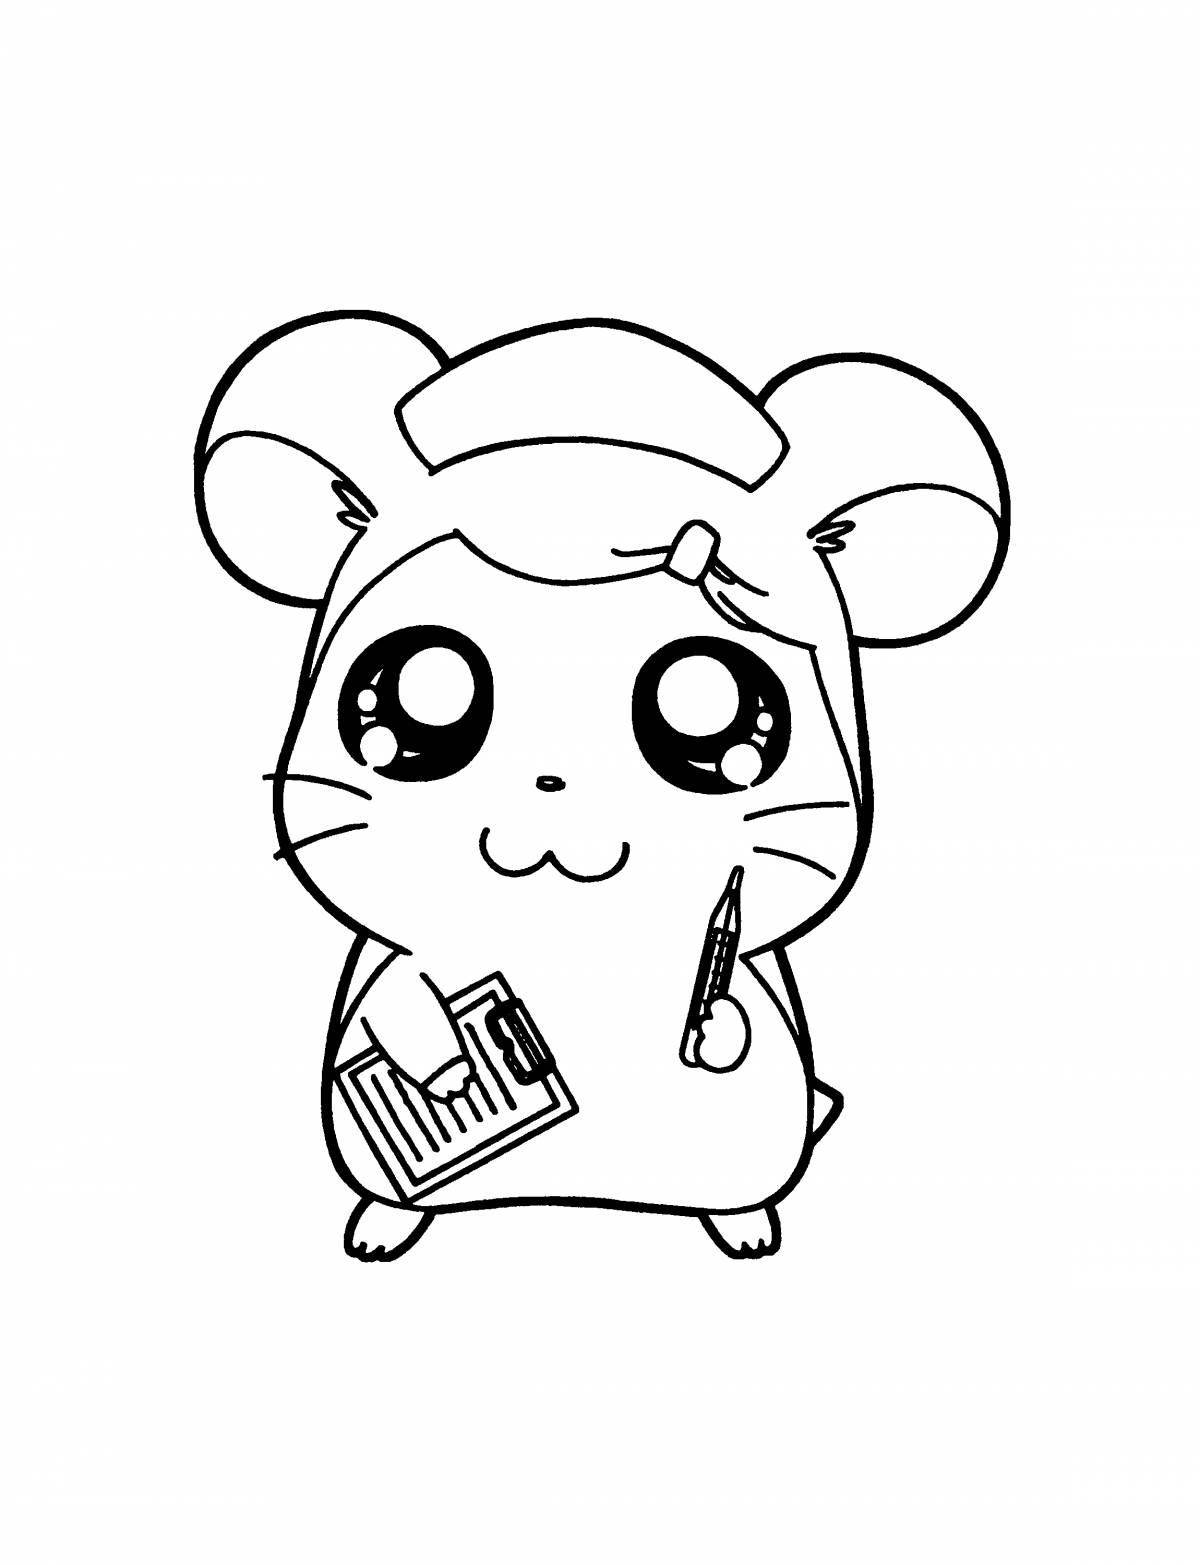 Irresistible hamster coloring pages